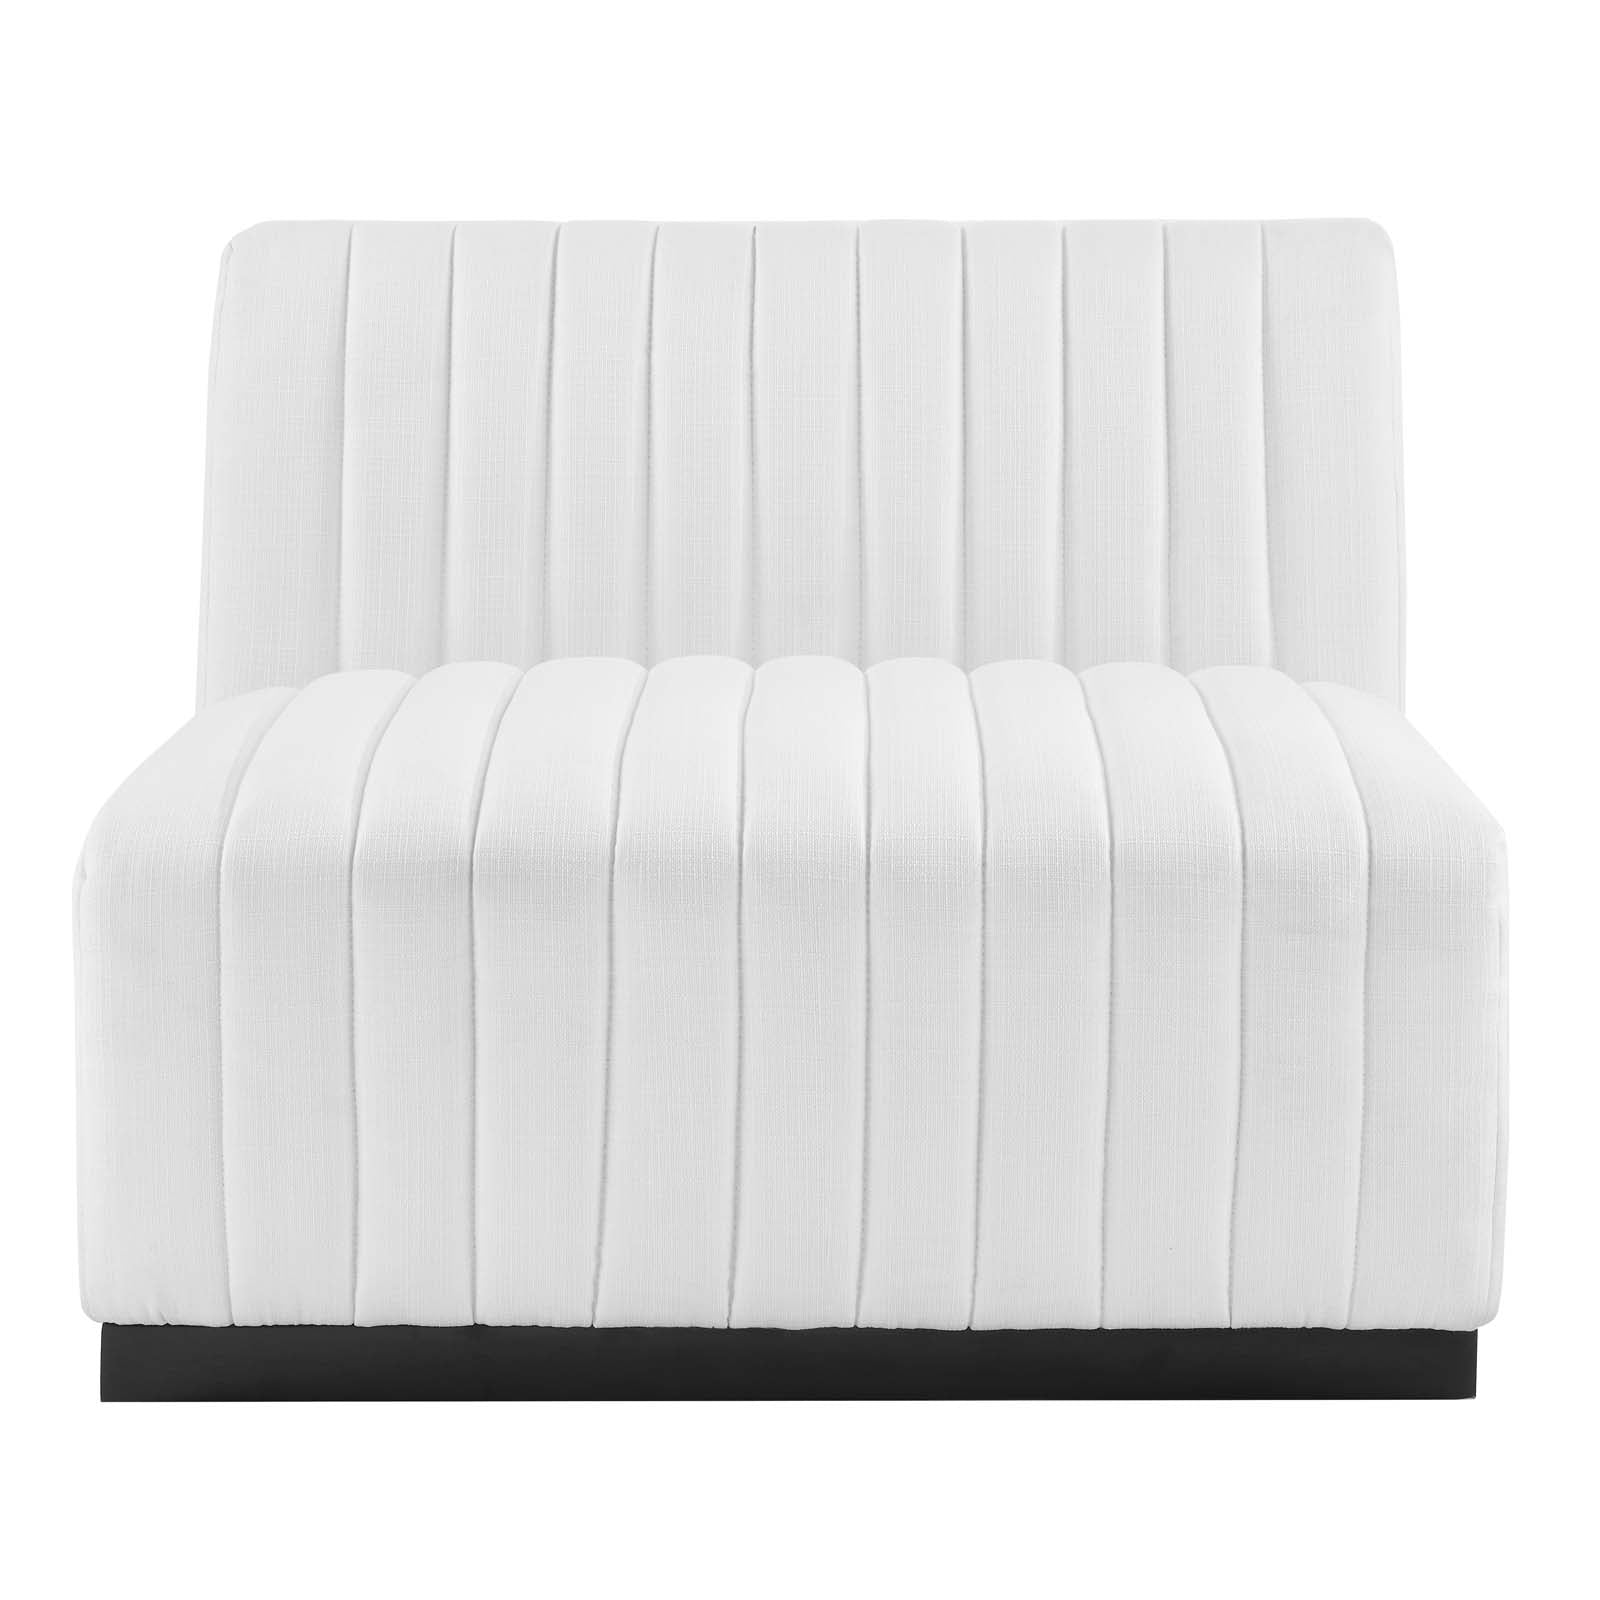 Modway Sectional Sofas - Conjure Channel Tufted 114 " W Upholstered Fabric 5-Piece L-Shaped Sectional Black White